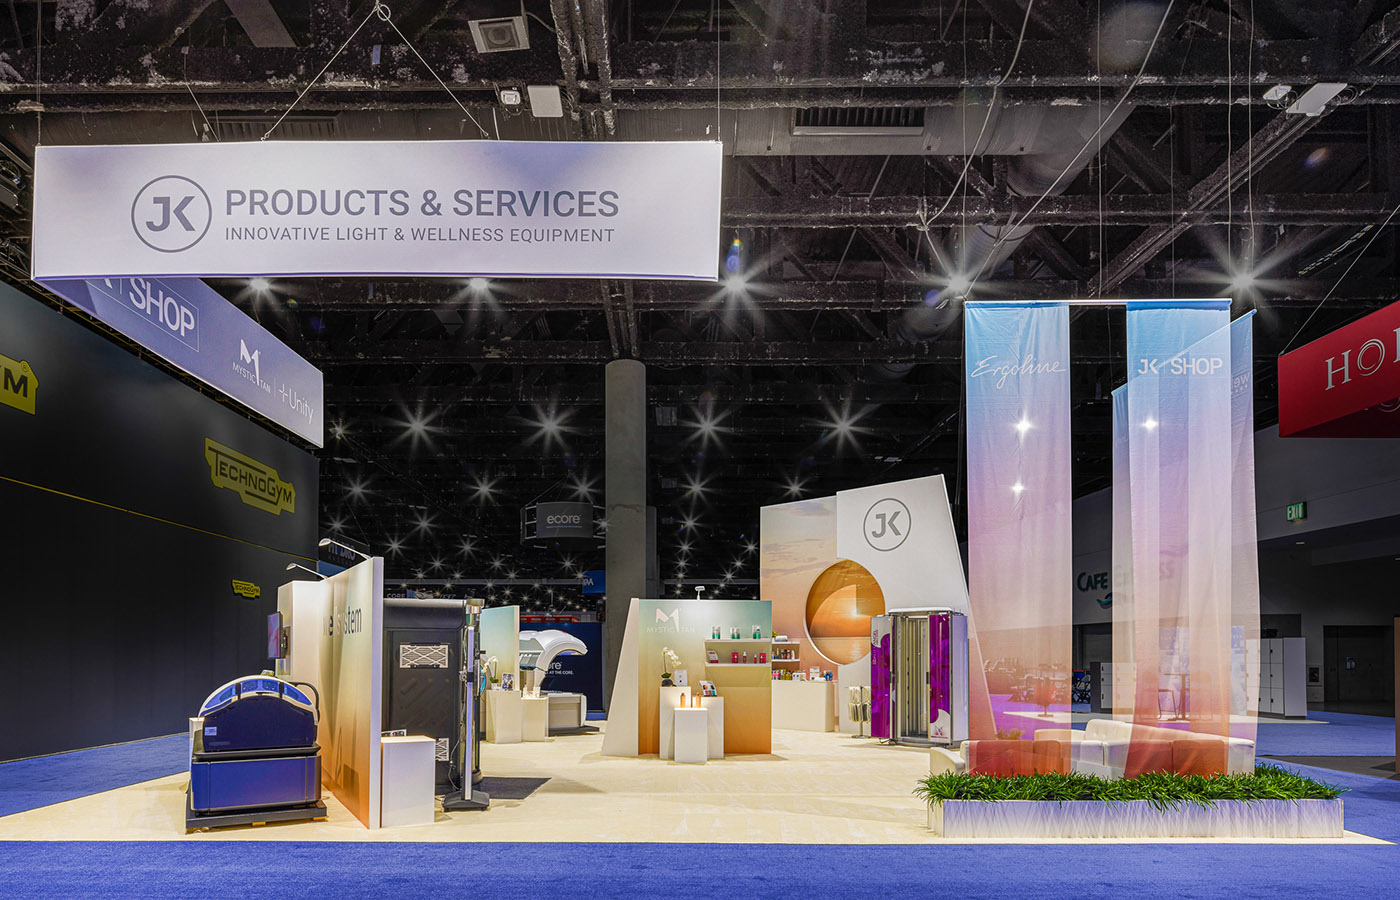 NBAA | BACE 2021 Trade Show Displays & Event Services